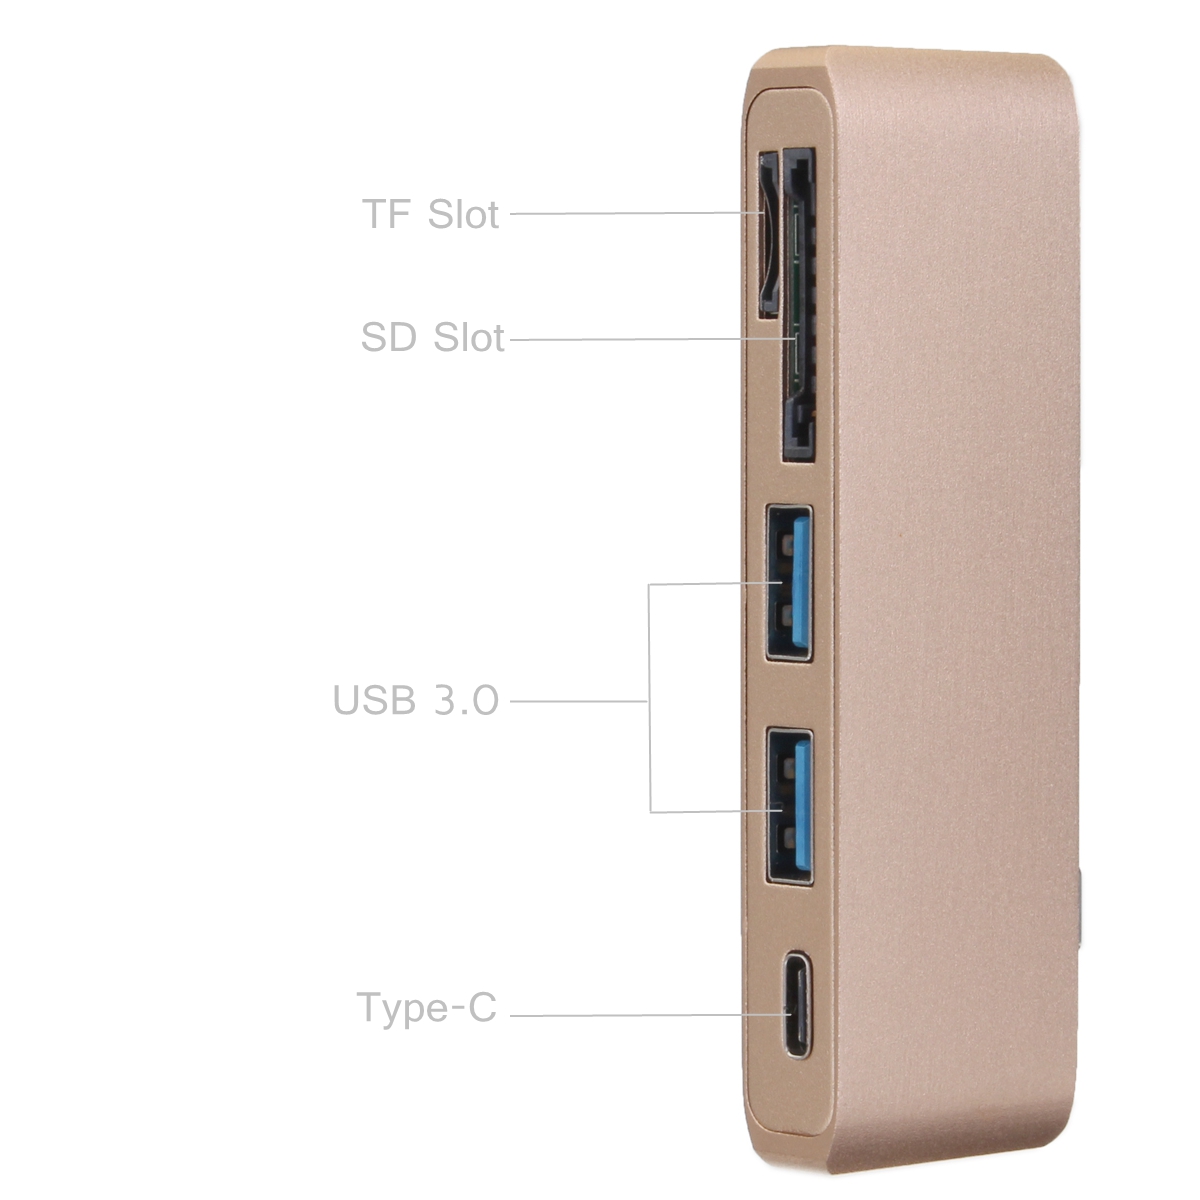 Multifunction USB Hub Type-C to Type-C USB 3.0 2Ports TF SD Card Reader for Laptop PC 10